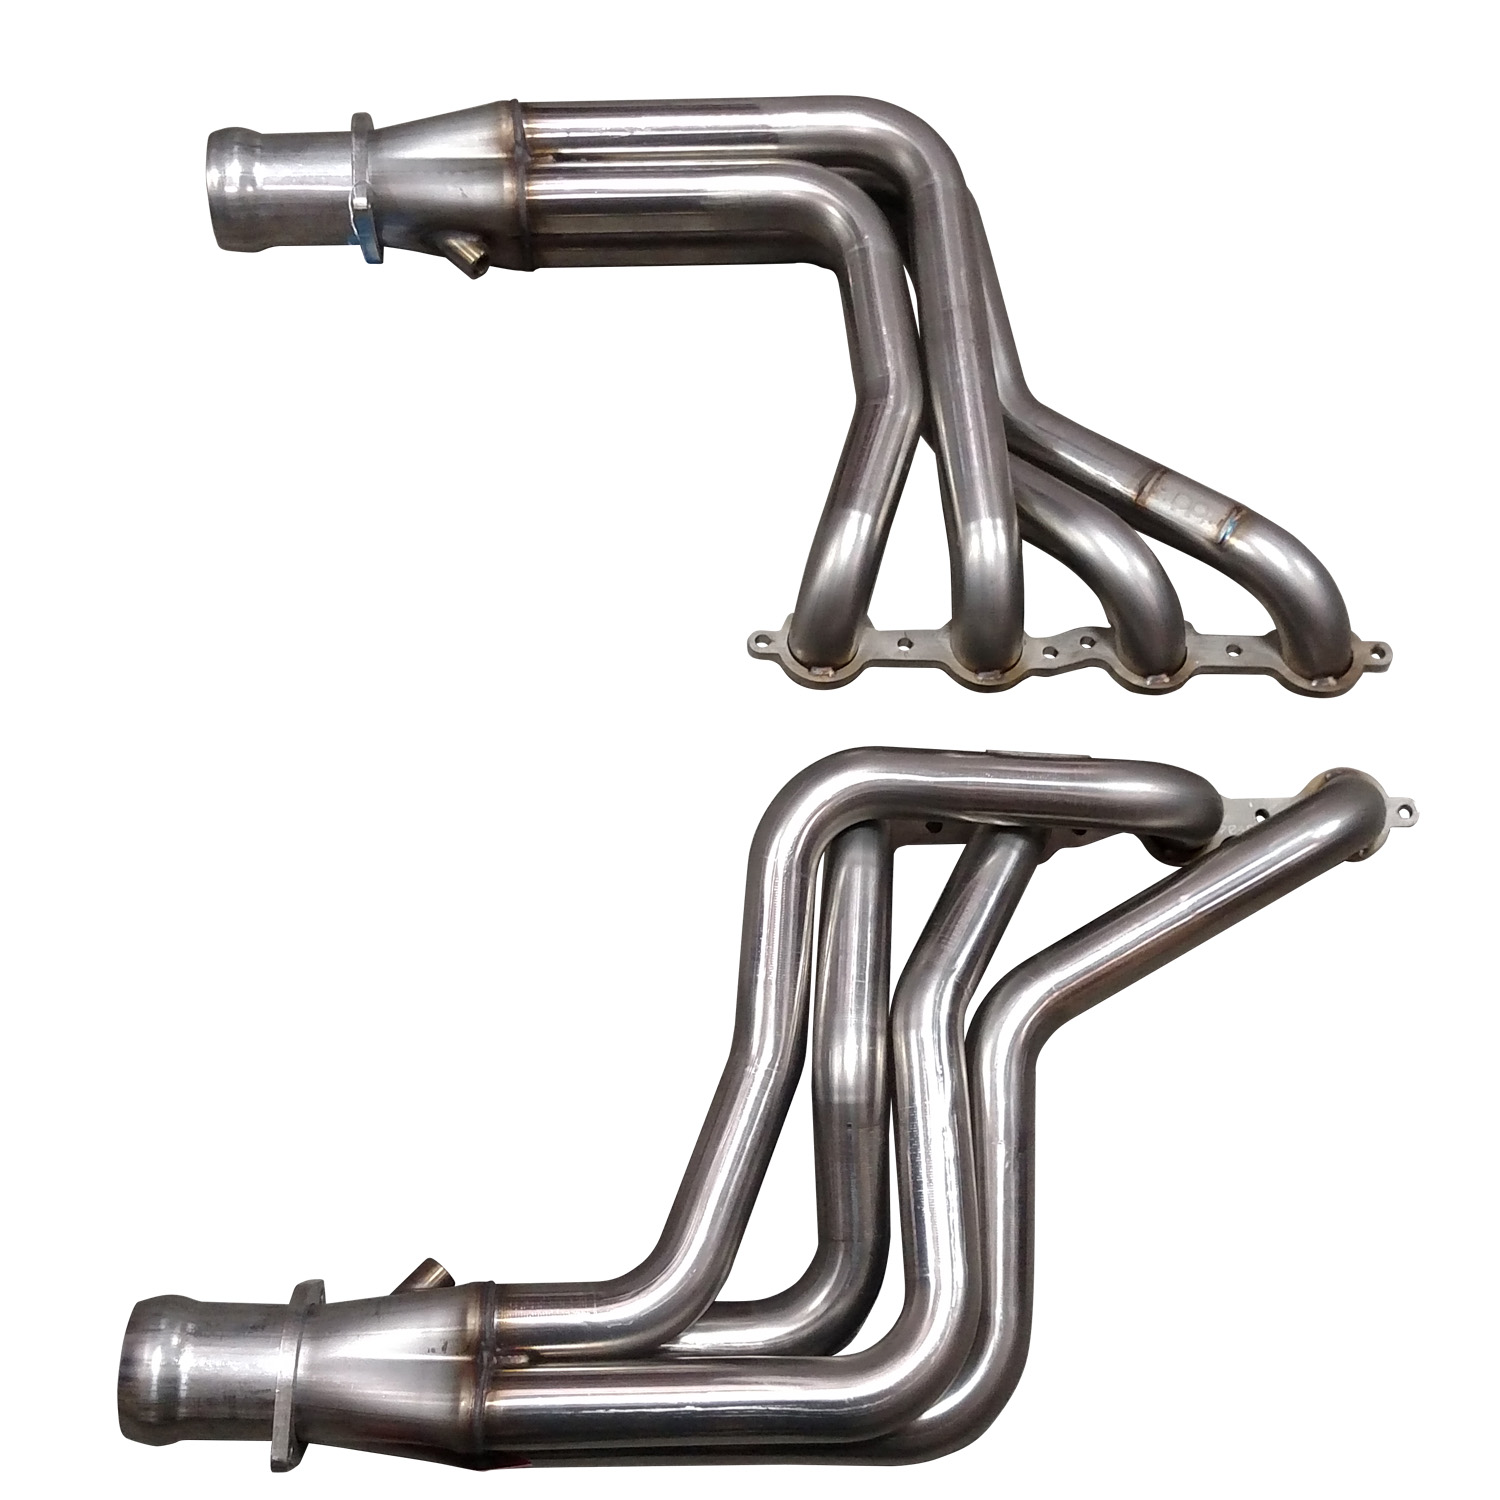 Stainless Steel Headers 1.875 x 3" Long Tube w/Merge Collectors 68-1972 Chevelle, El Camino, Grand Sport, Sprint, Wagons, Skylar